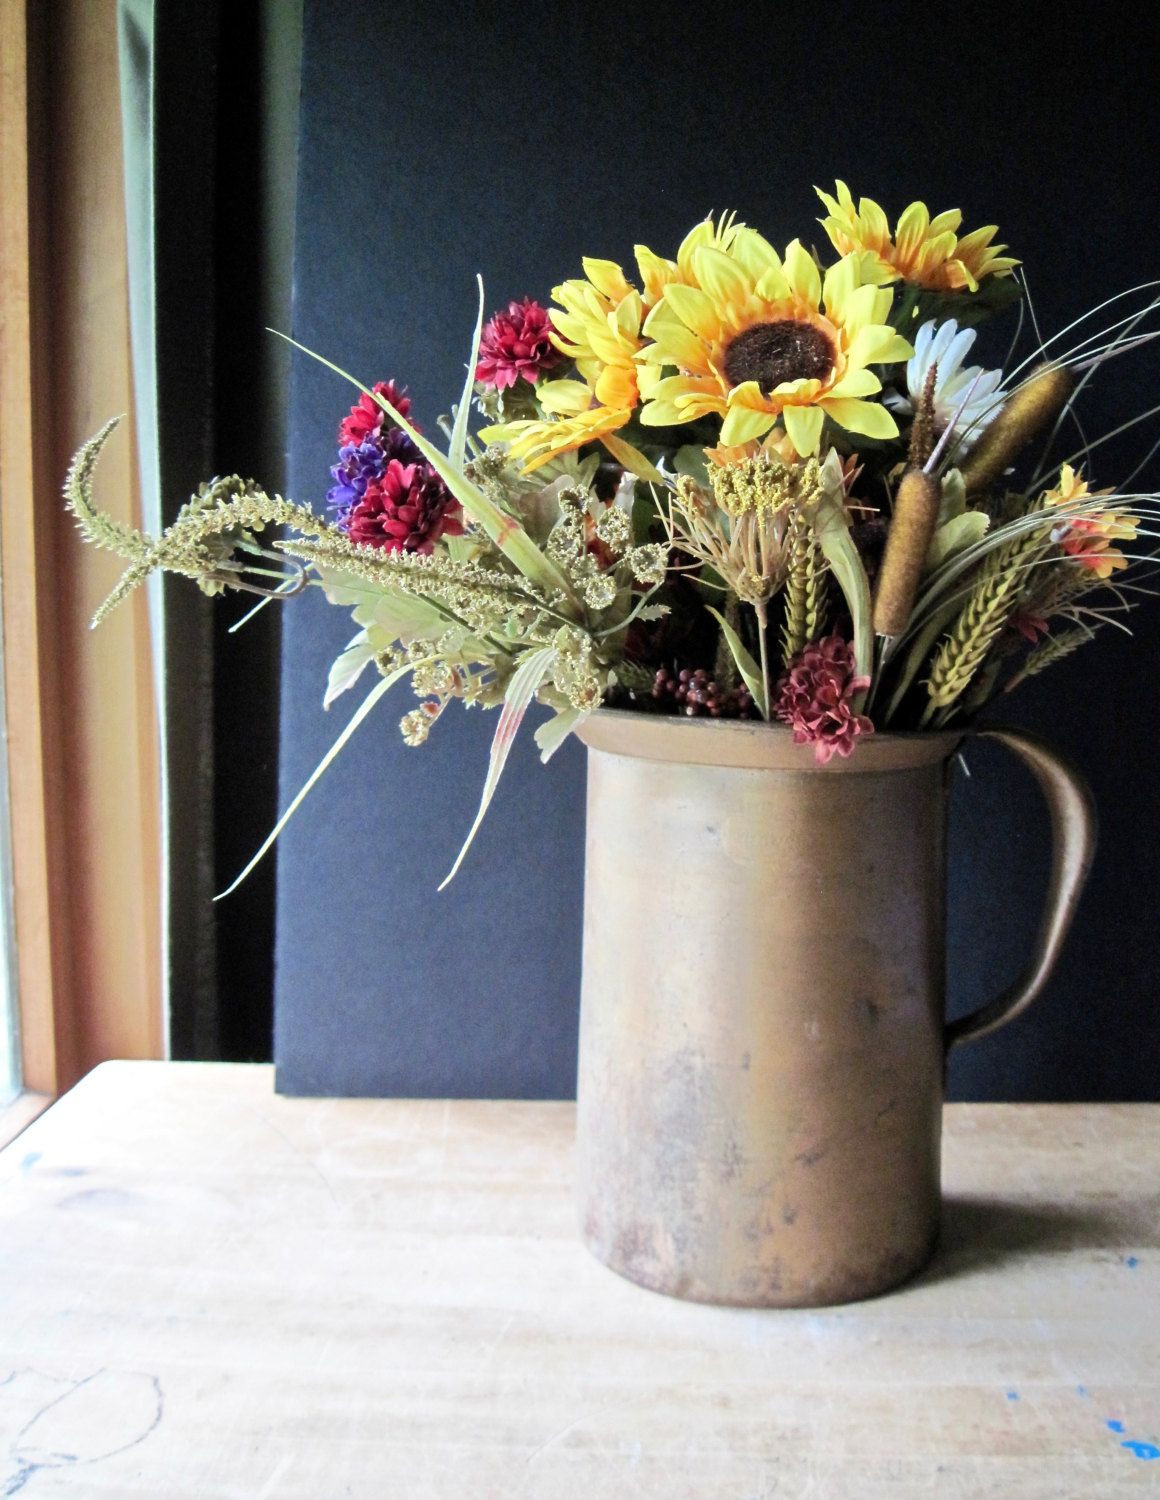 19 Recommended Rustic Metal Flower Vase 2024 free download rustic metal flower vase of primitive rustic metal pitcher industrial garden farmhouse french within primitive rustic metal pitcher industrial garden farmhouse french country decor security 